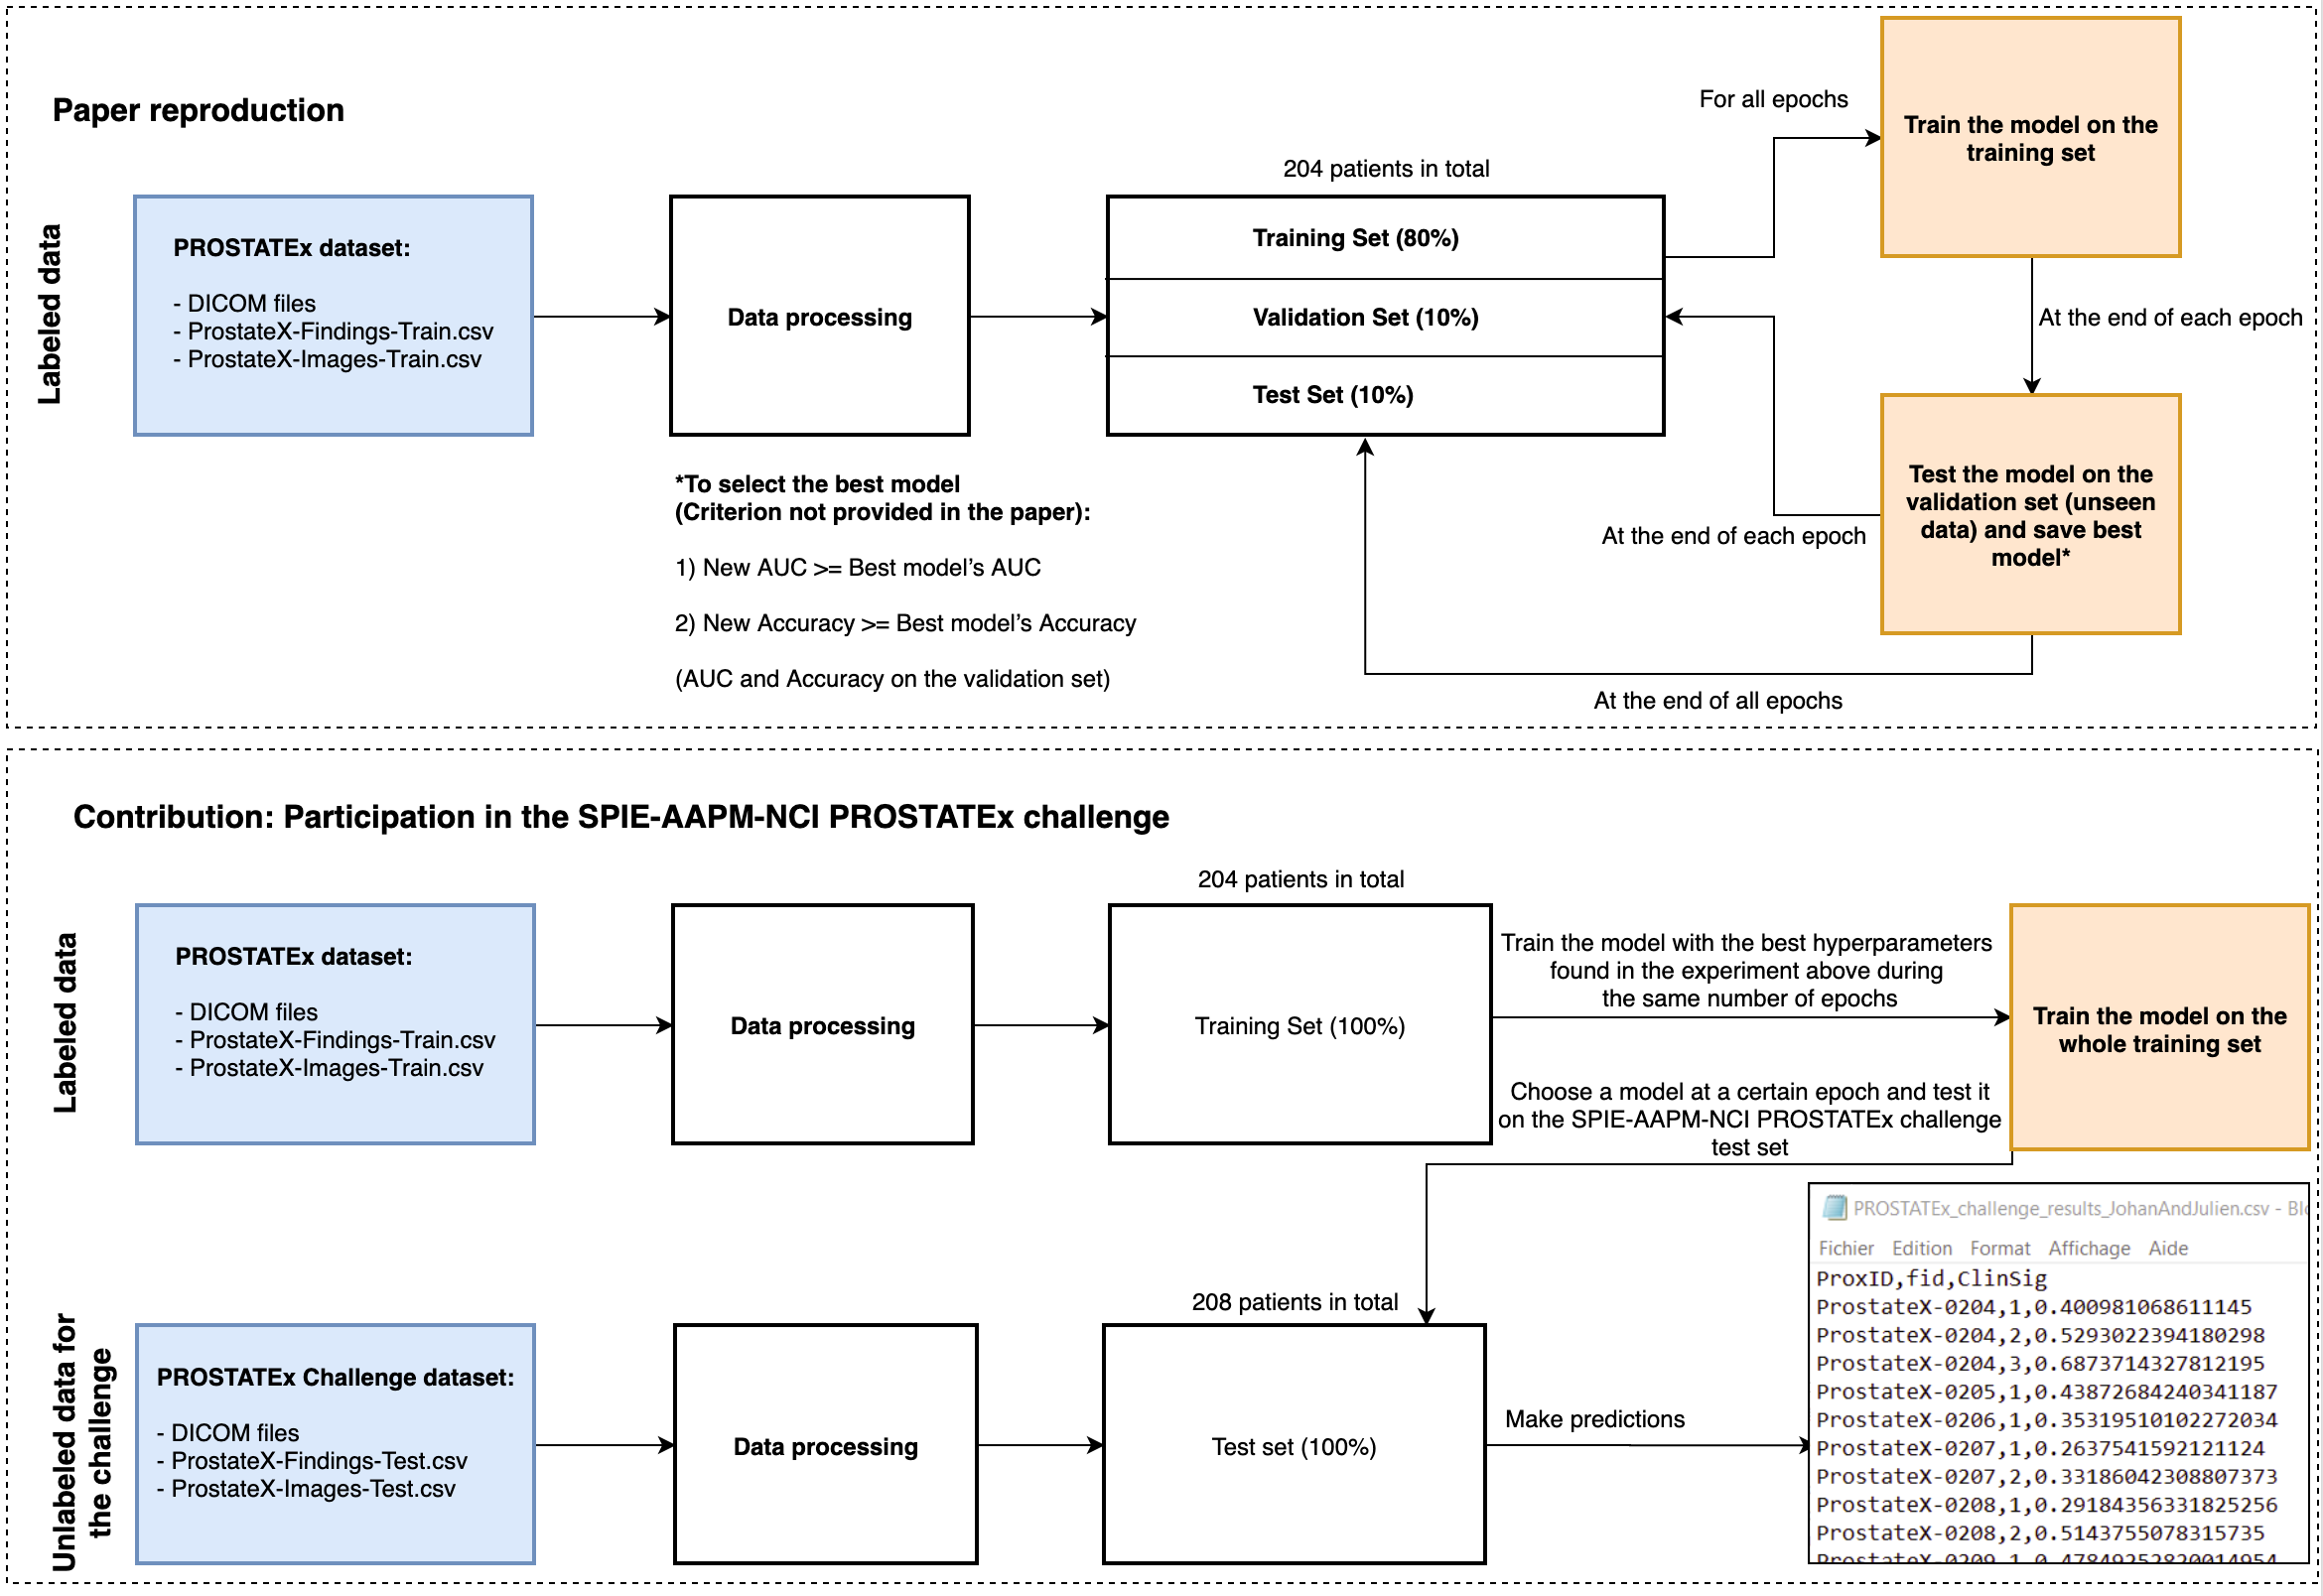 Process overview